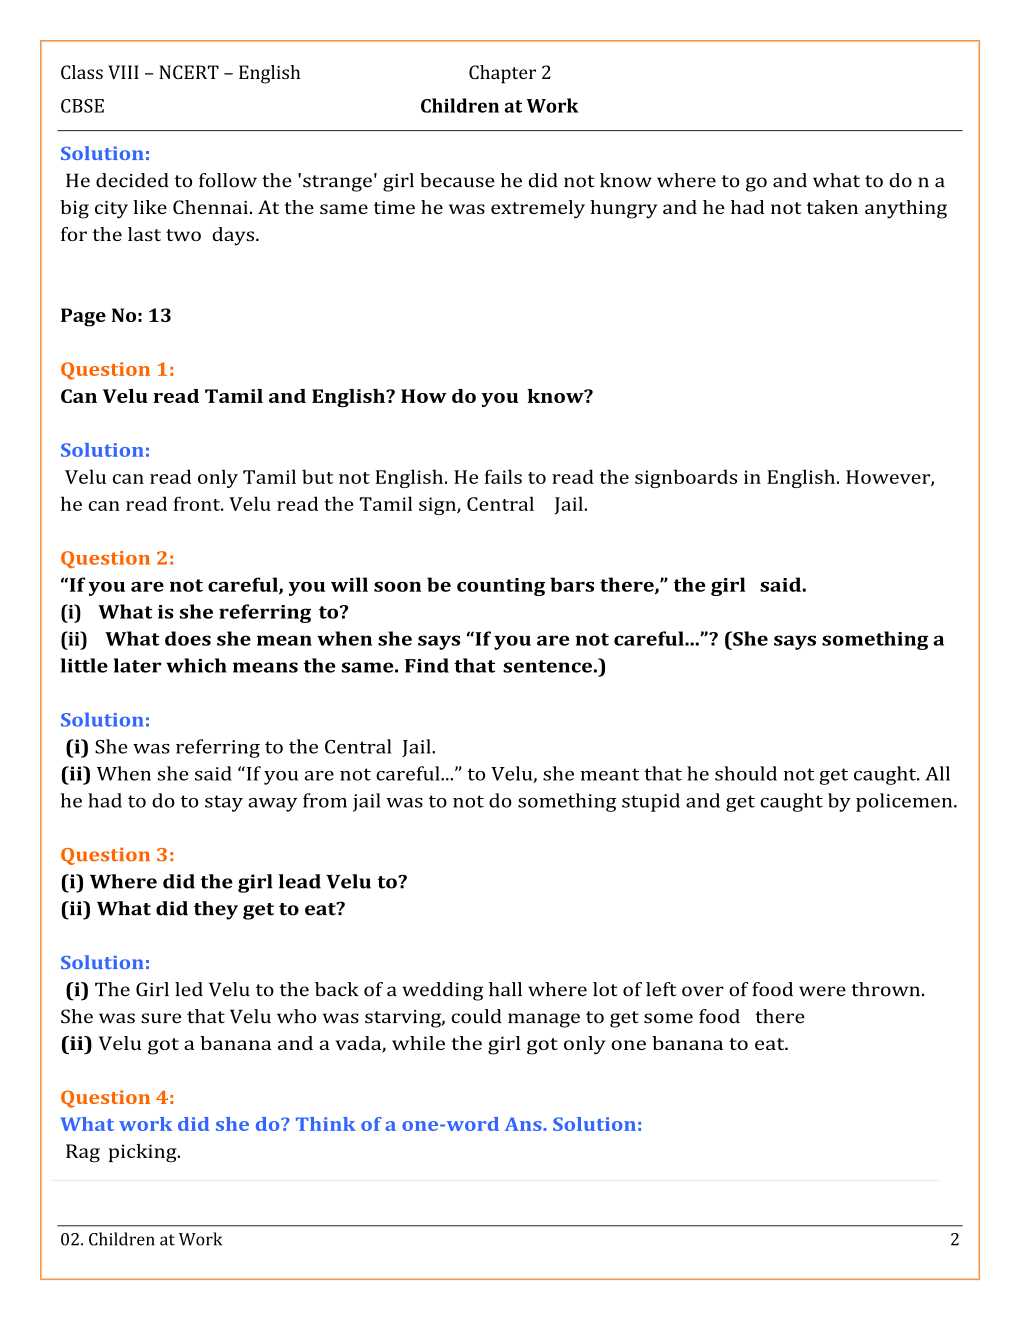 NCERT Solutions For Class 8 English It So Happened Chapter 2